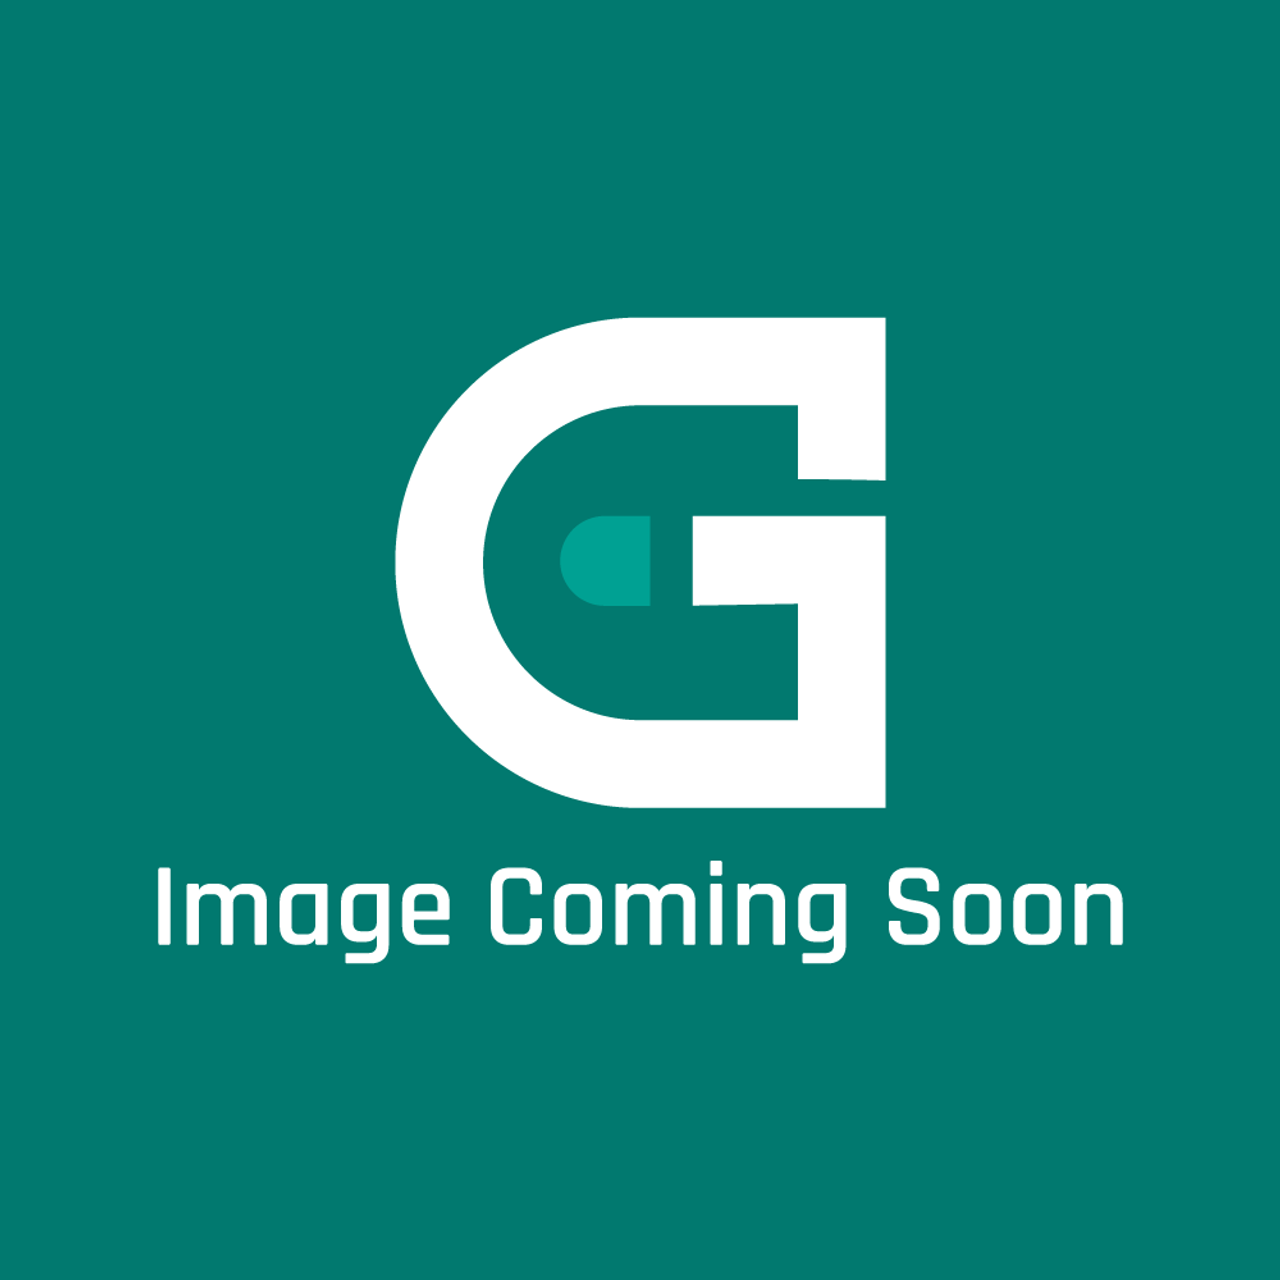 Frigidaire - Electrolux 316576303 Controller - Image Coming Soon!